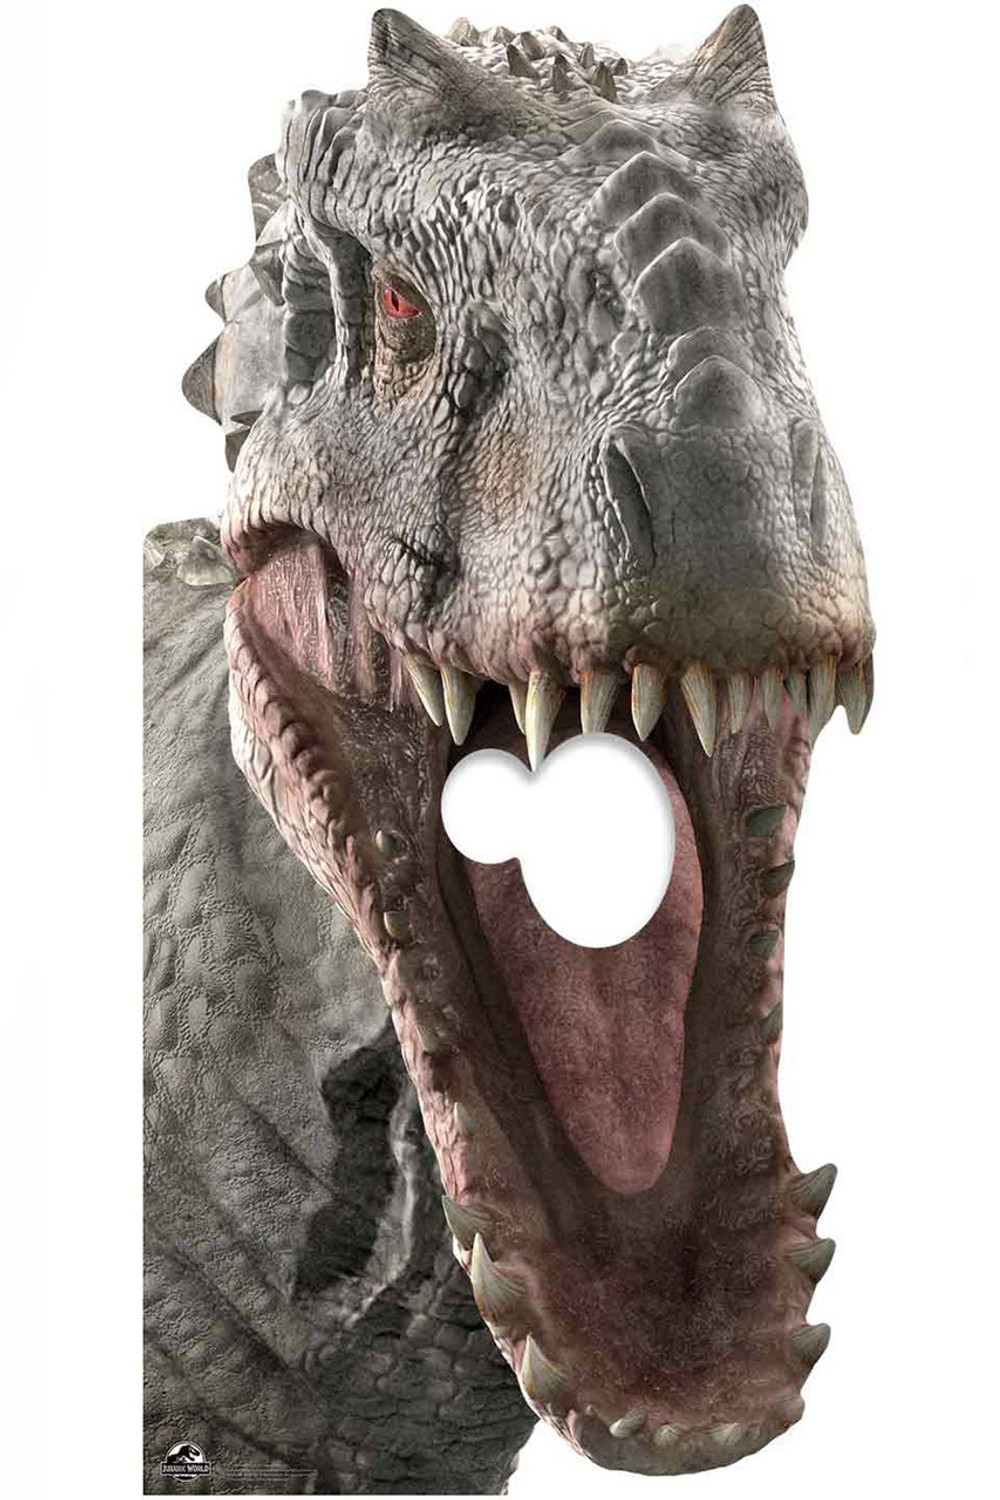 Indominus Rex Official Jurassic World Stand in Lifesize Cardboard Cutout